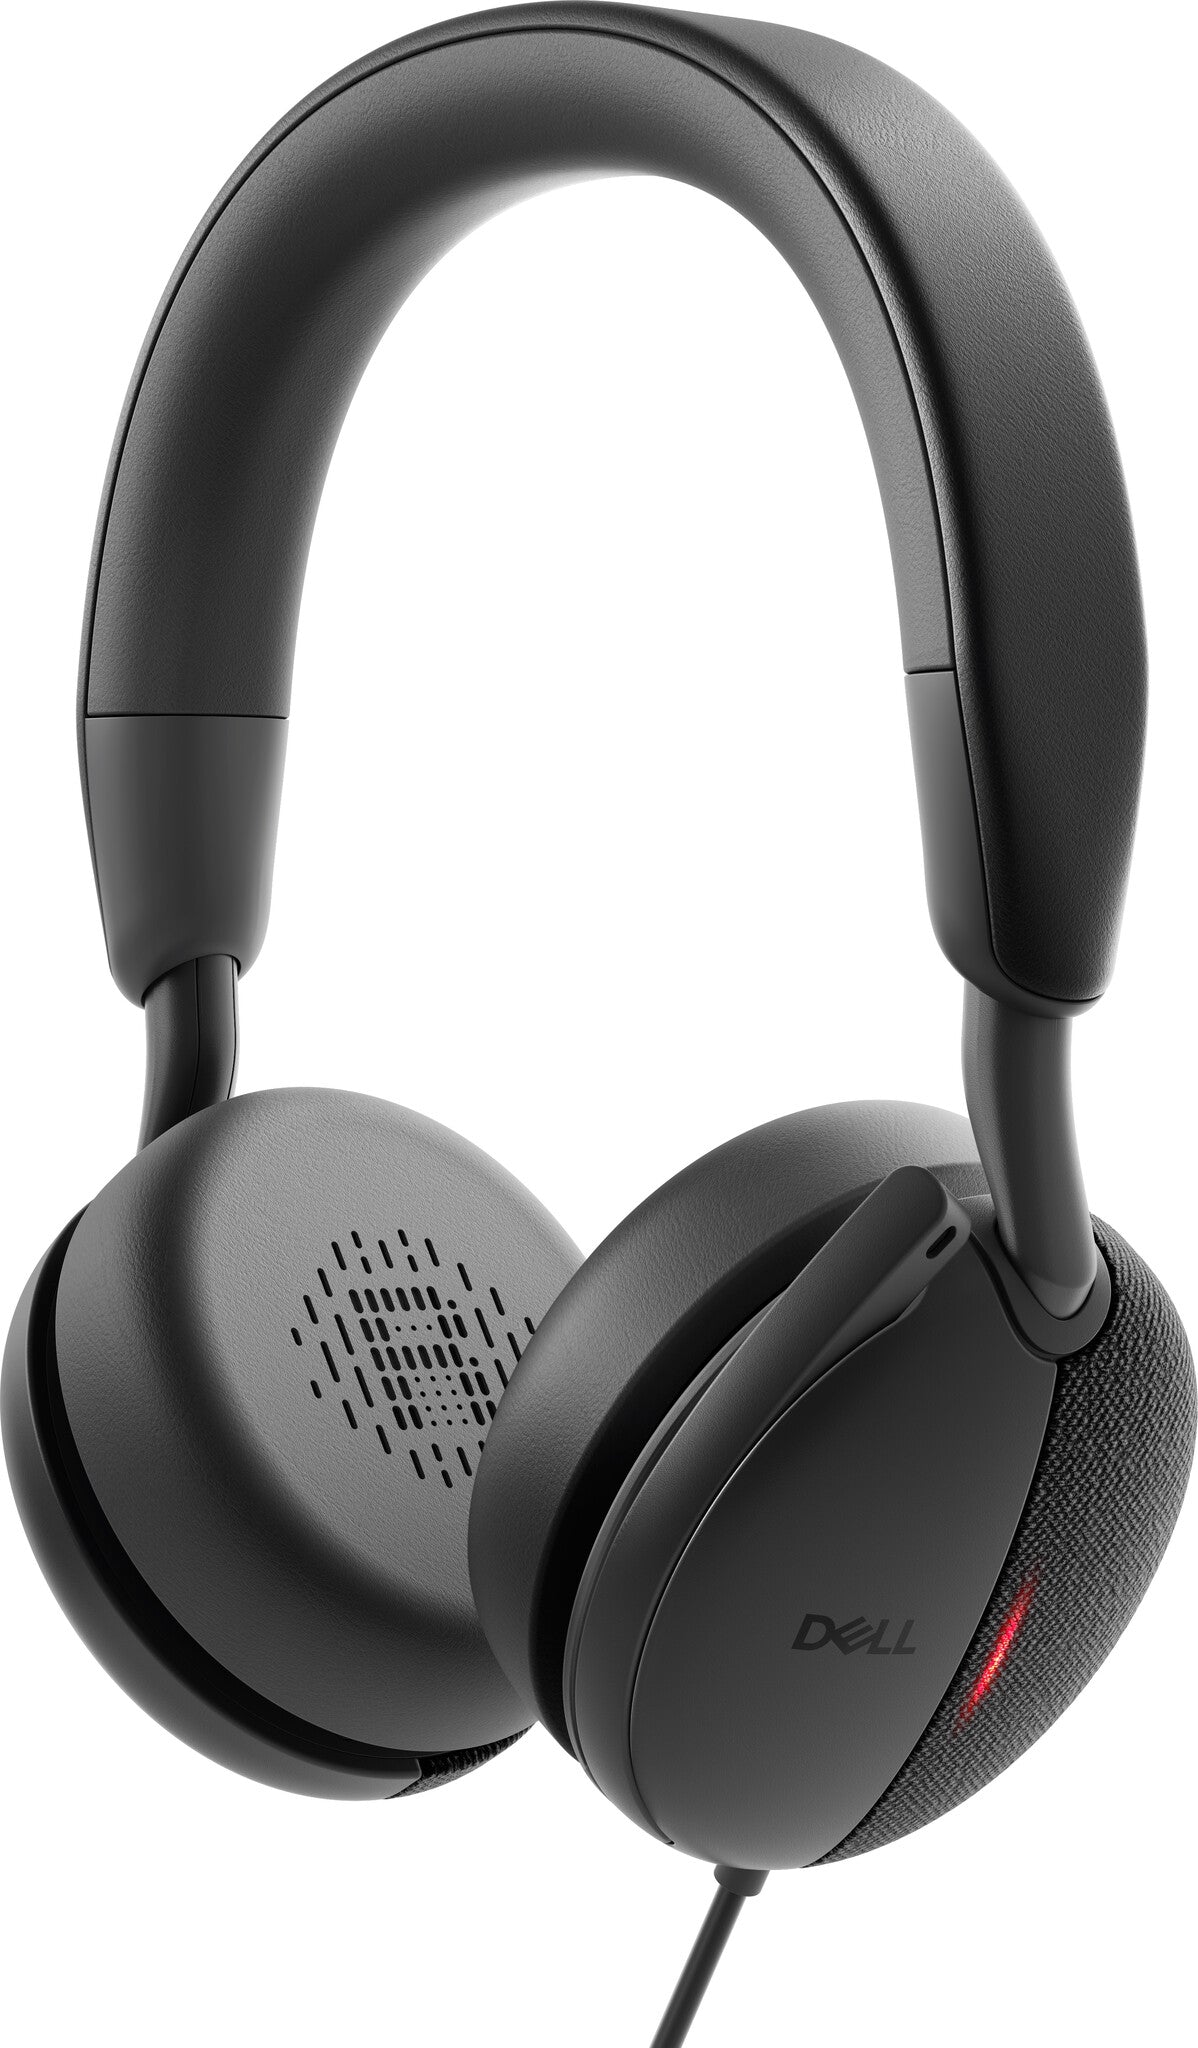 DELL WH5024 - USB Type-C Wired Headset in Black